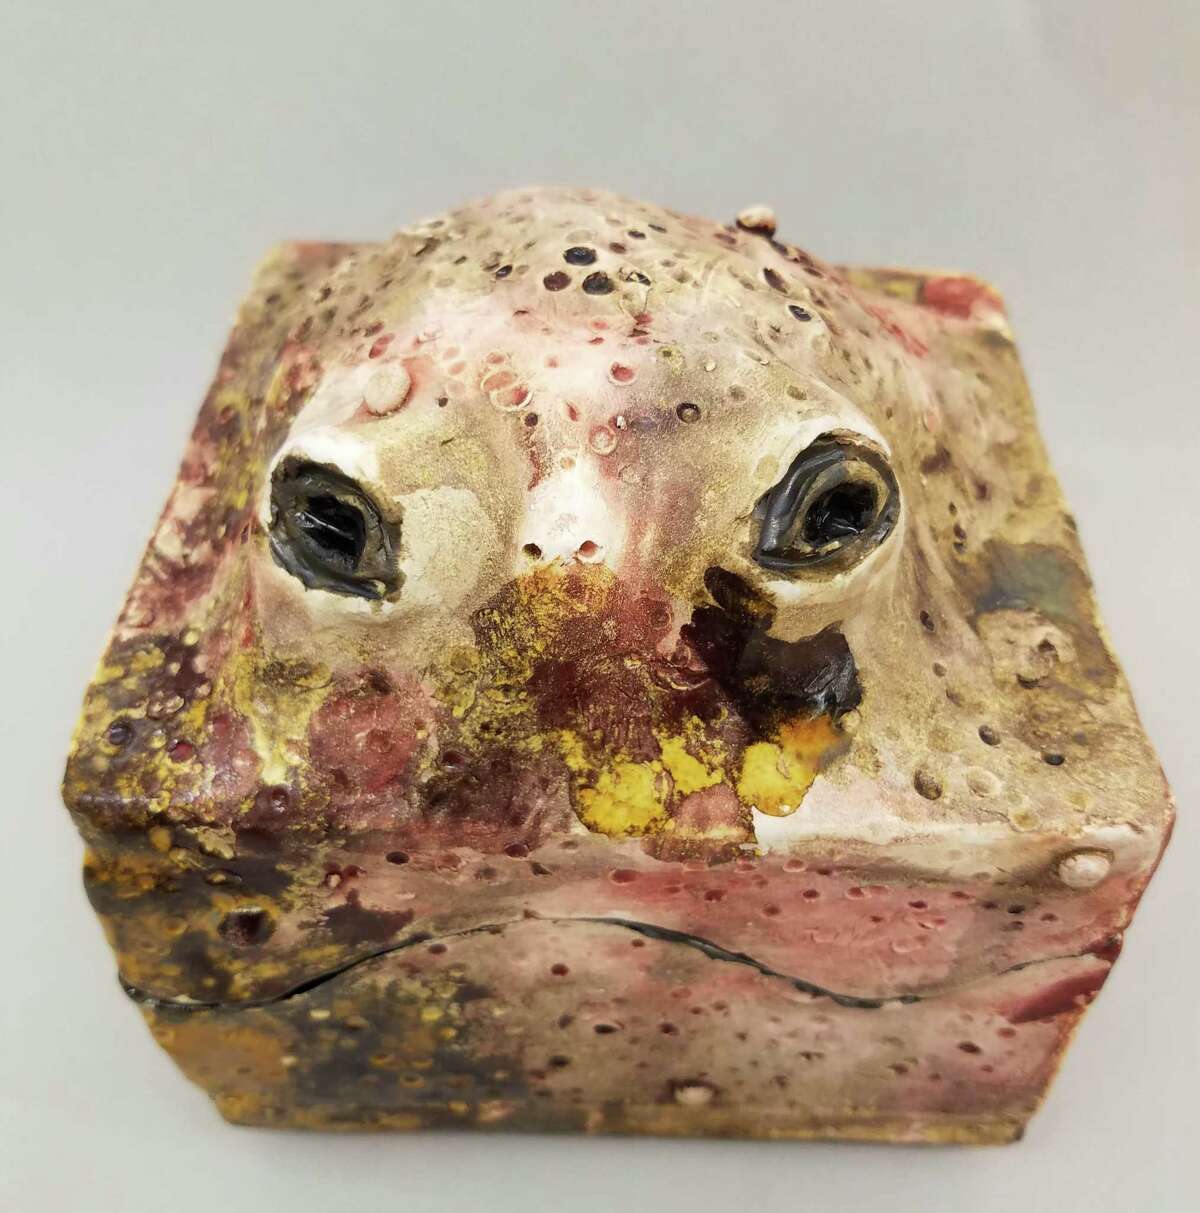 “Toad Box,” created by New Milford High School junior Kyle Paist, has been accepted into the National K-12 Juried Student Ceramics Exhibition.